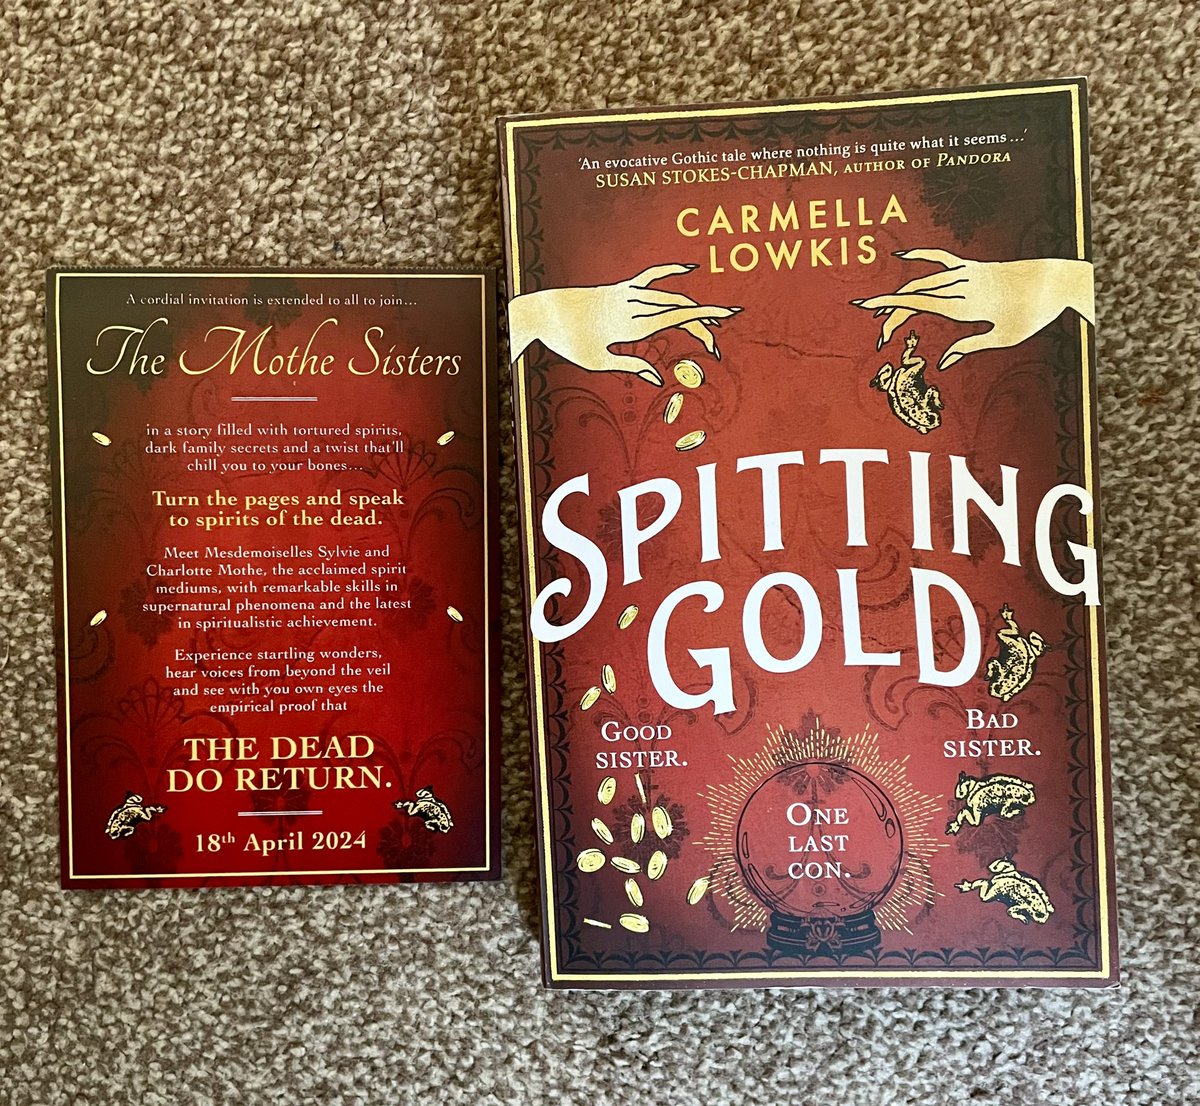 Huge thanks to @DoubledayUK for this beautiful #BookPost. My gothic-loving heart is so intrigued by @carmellalowkis’s #SpittingGold, due out 18 April, so hoping to get to this one soon! #BookBlogger